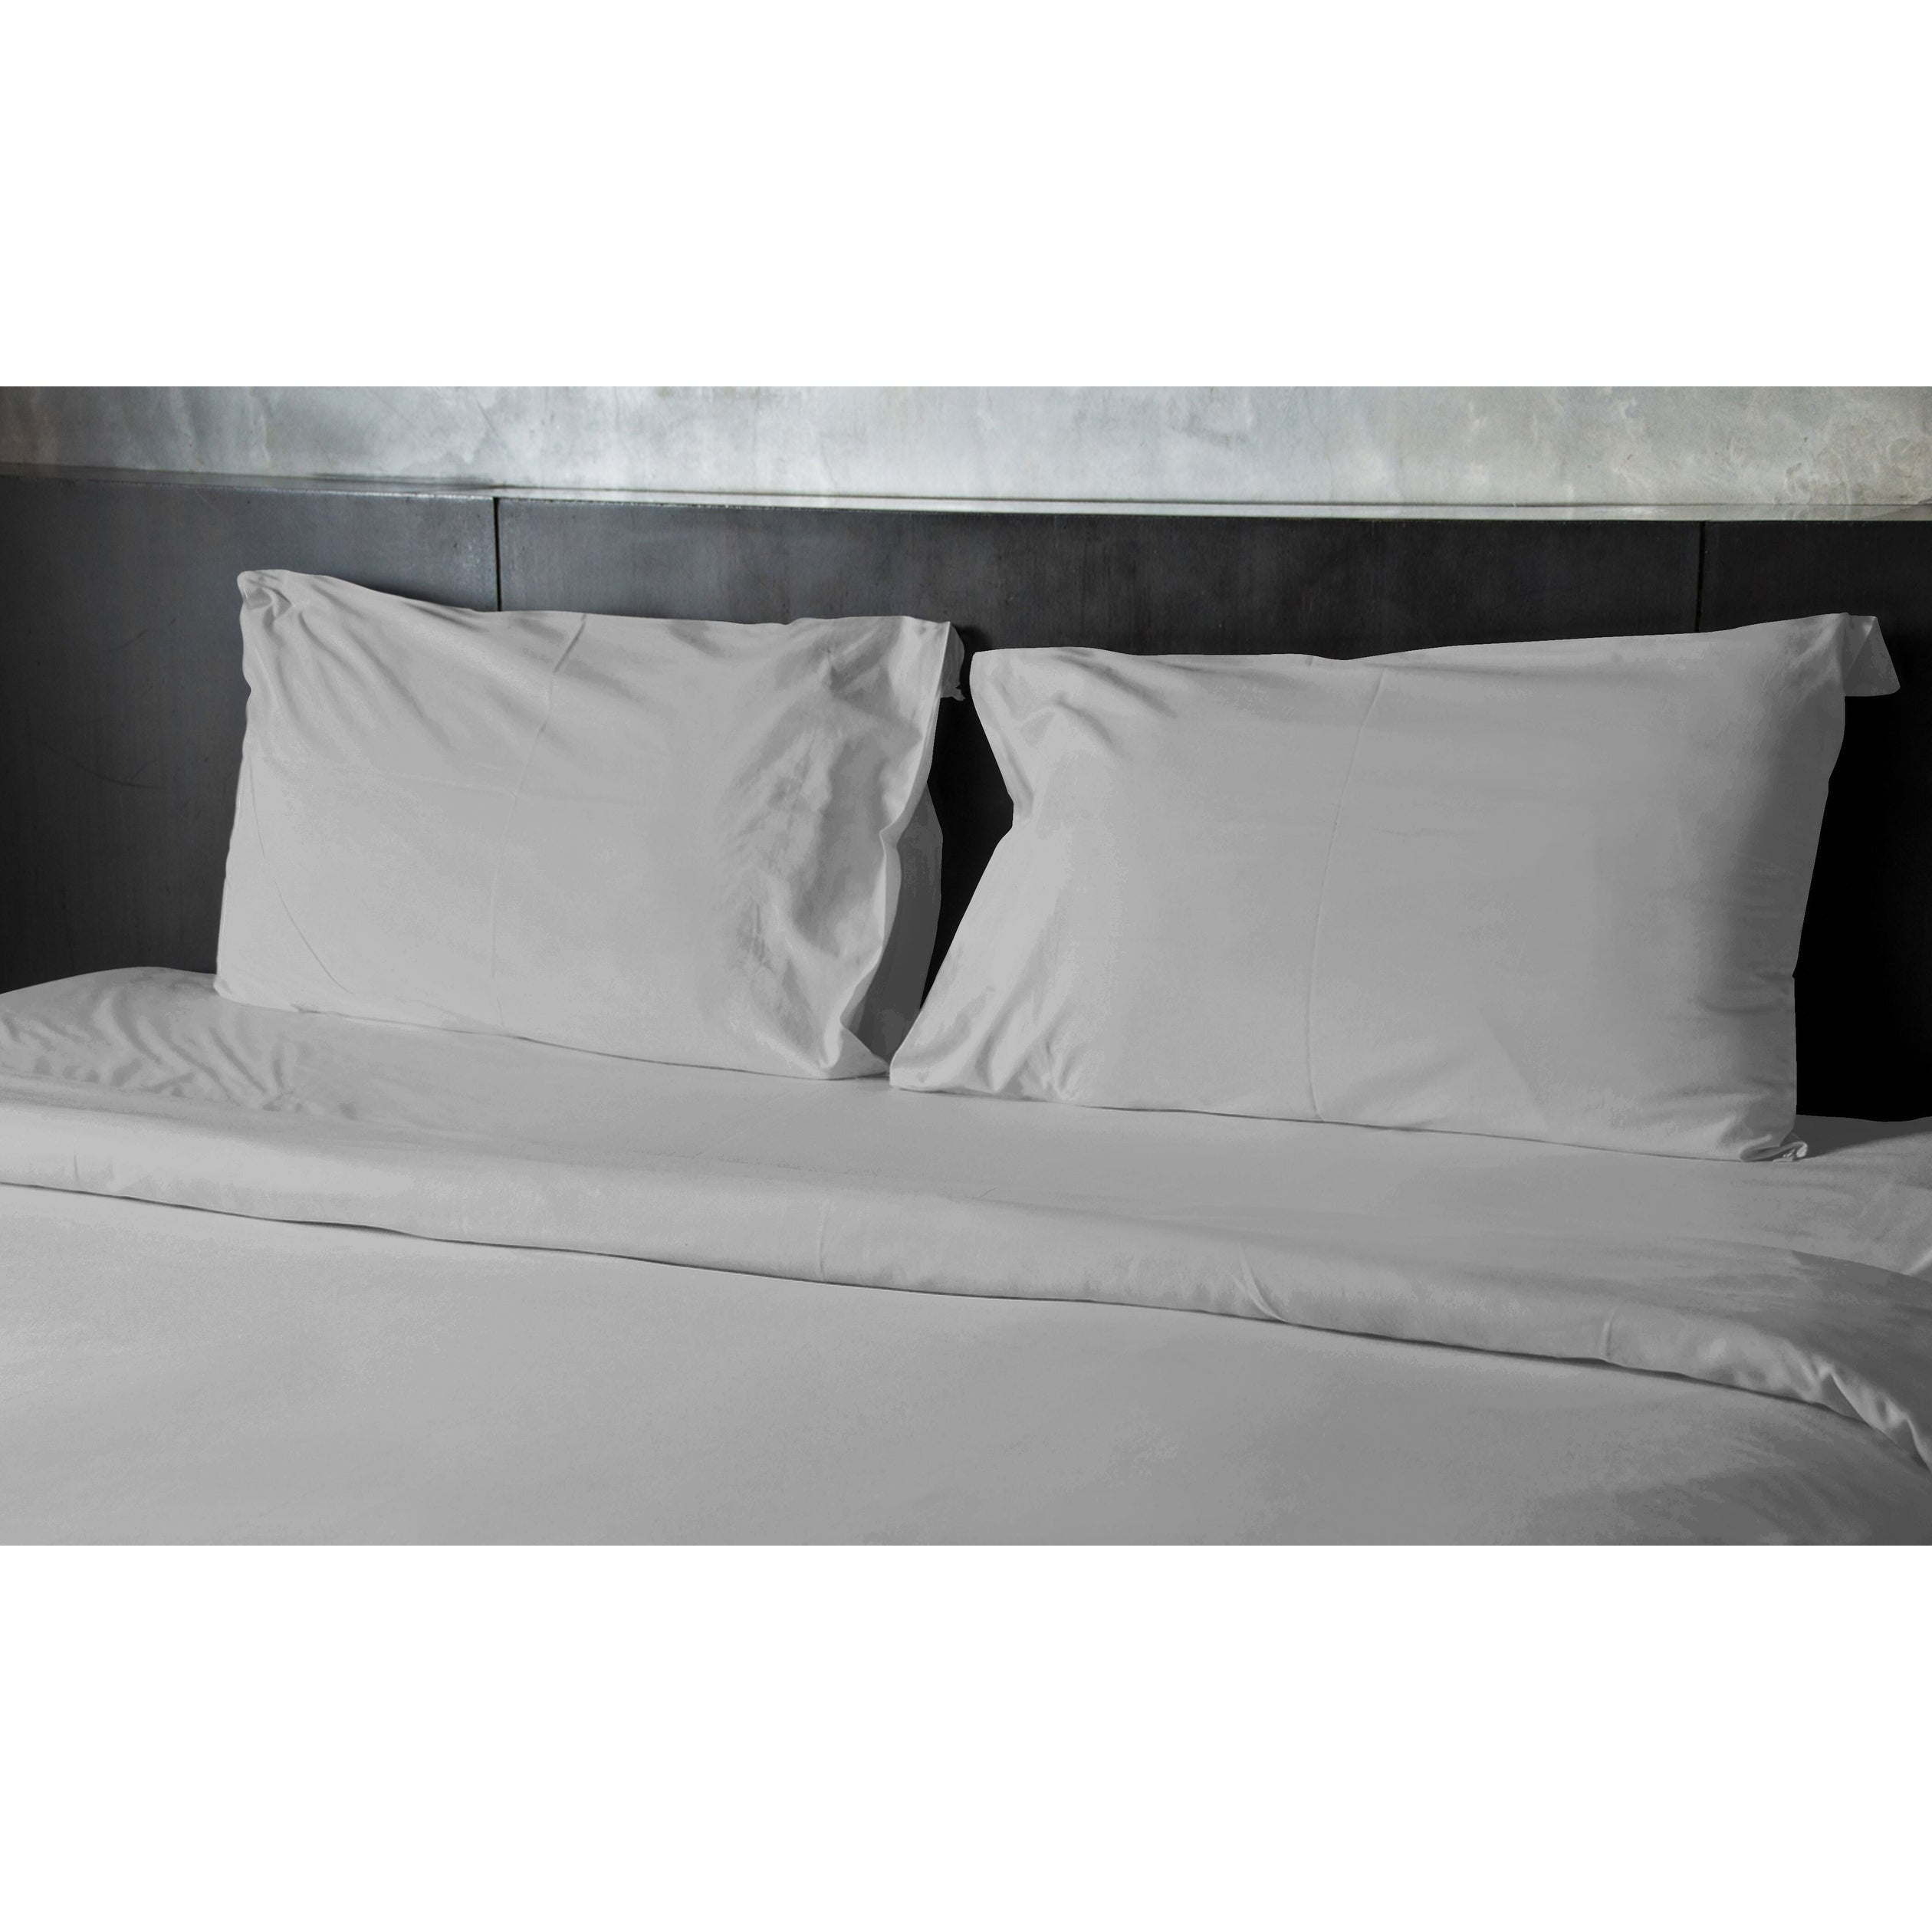 SOFTEST SHEETS 1800 HIGH THREAD COUNT EGYPTIAN COTTON FEEL COOL SET DEEP POCKETS